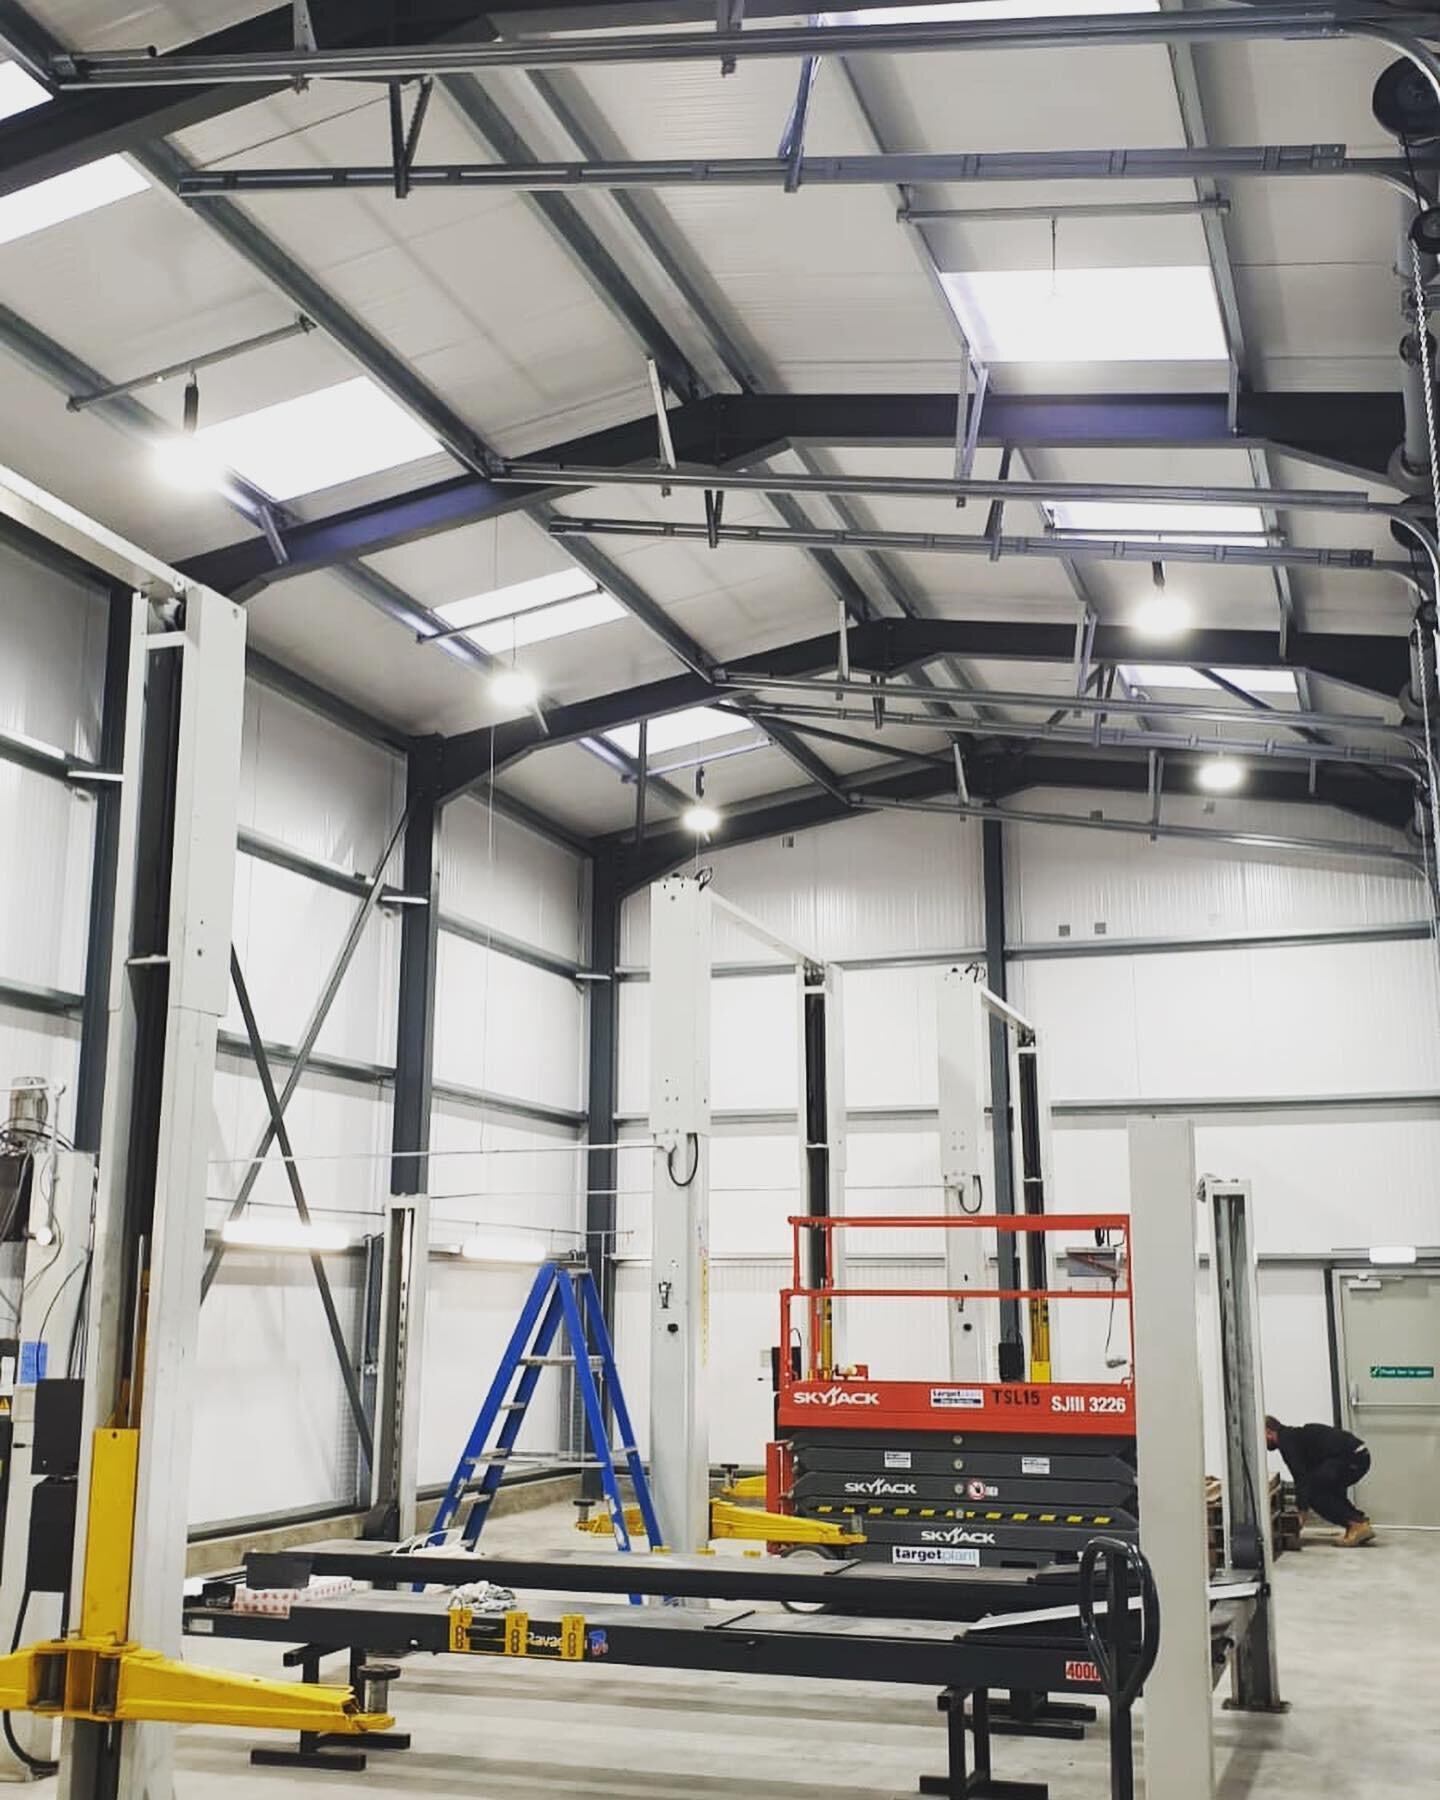 Brand new LED lighting and electrics in new workshop for Vehicle Repairs! 💡

#ledlights#workshop#workshoptime#garagegoals#lightroom#lighting#electrician#electricalcontractor#suffolkbusiness#smallbusinessuk#energyefficiency